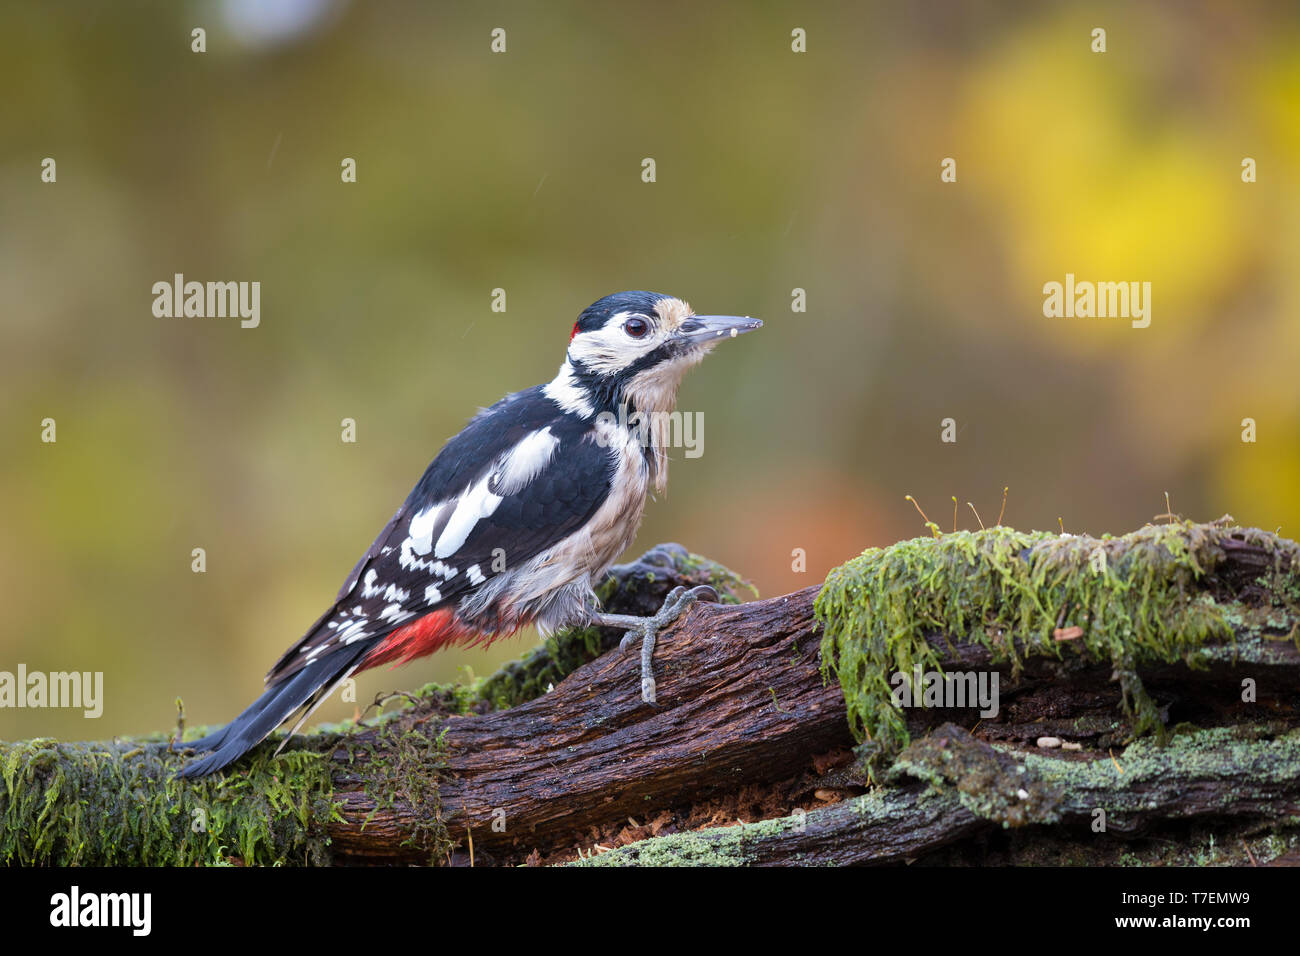 Great spotted woodpecker perched on a mossy log in autumn Stock Photo